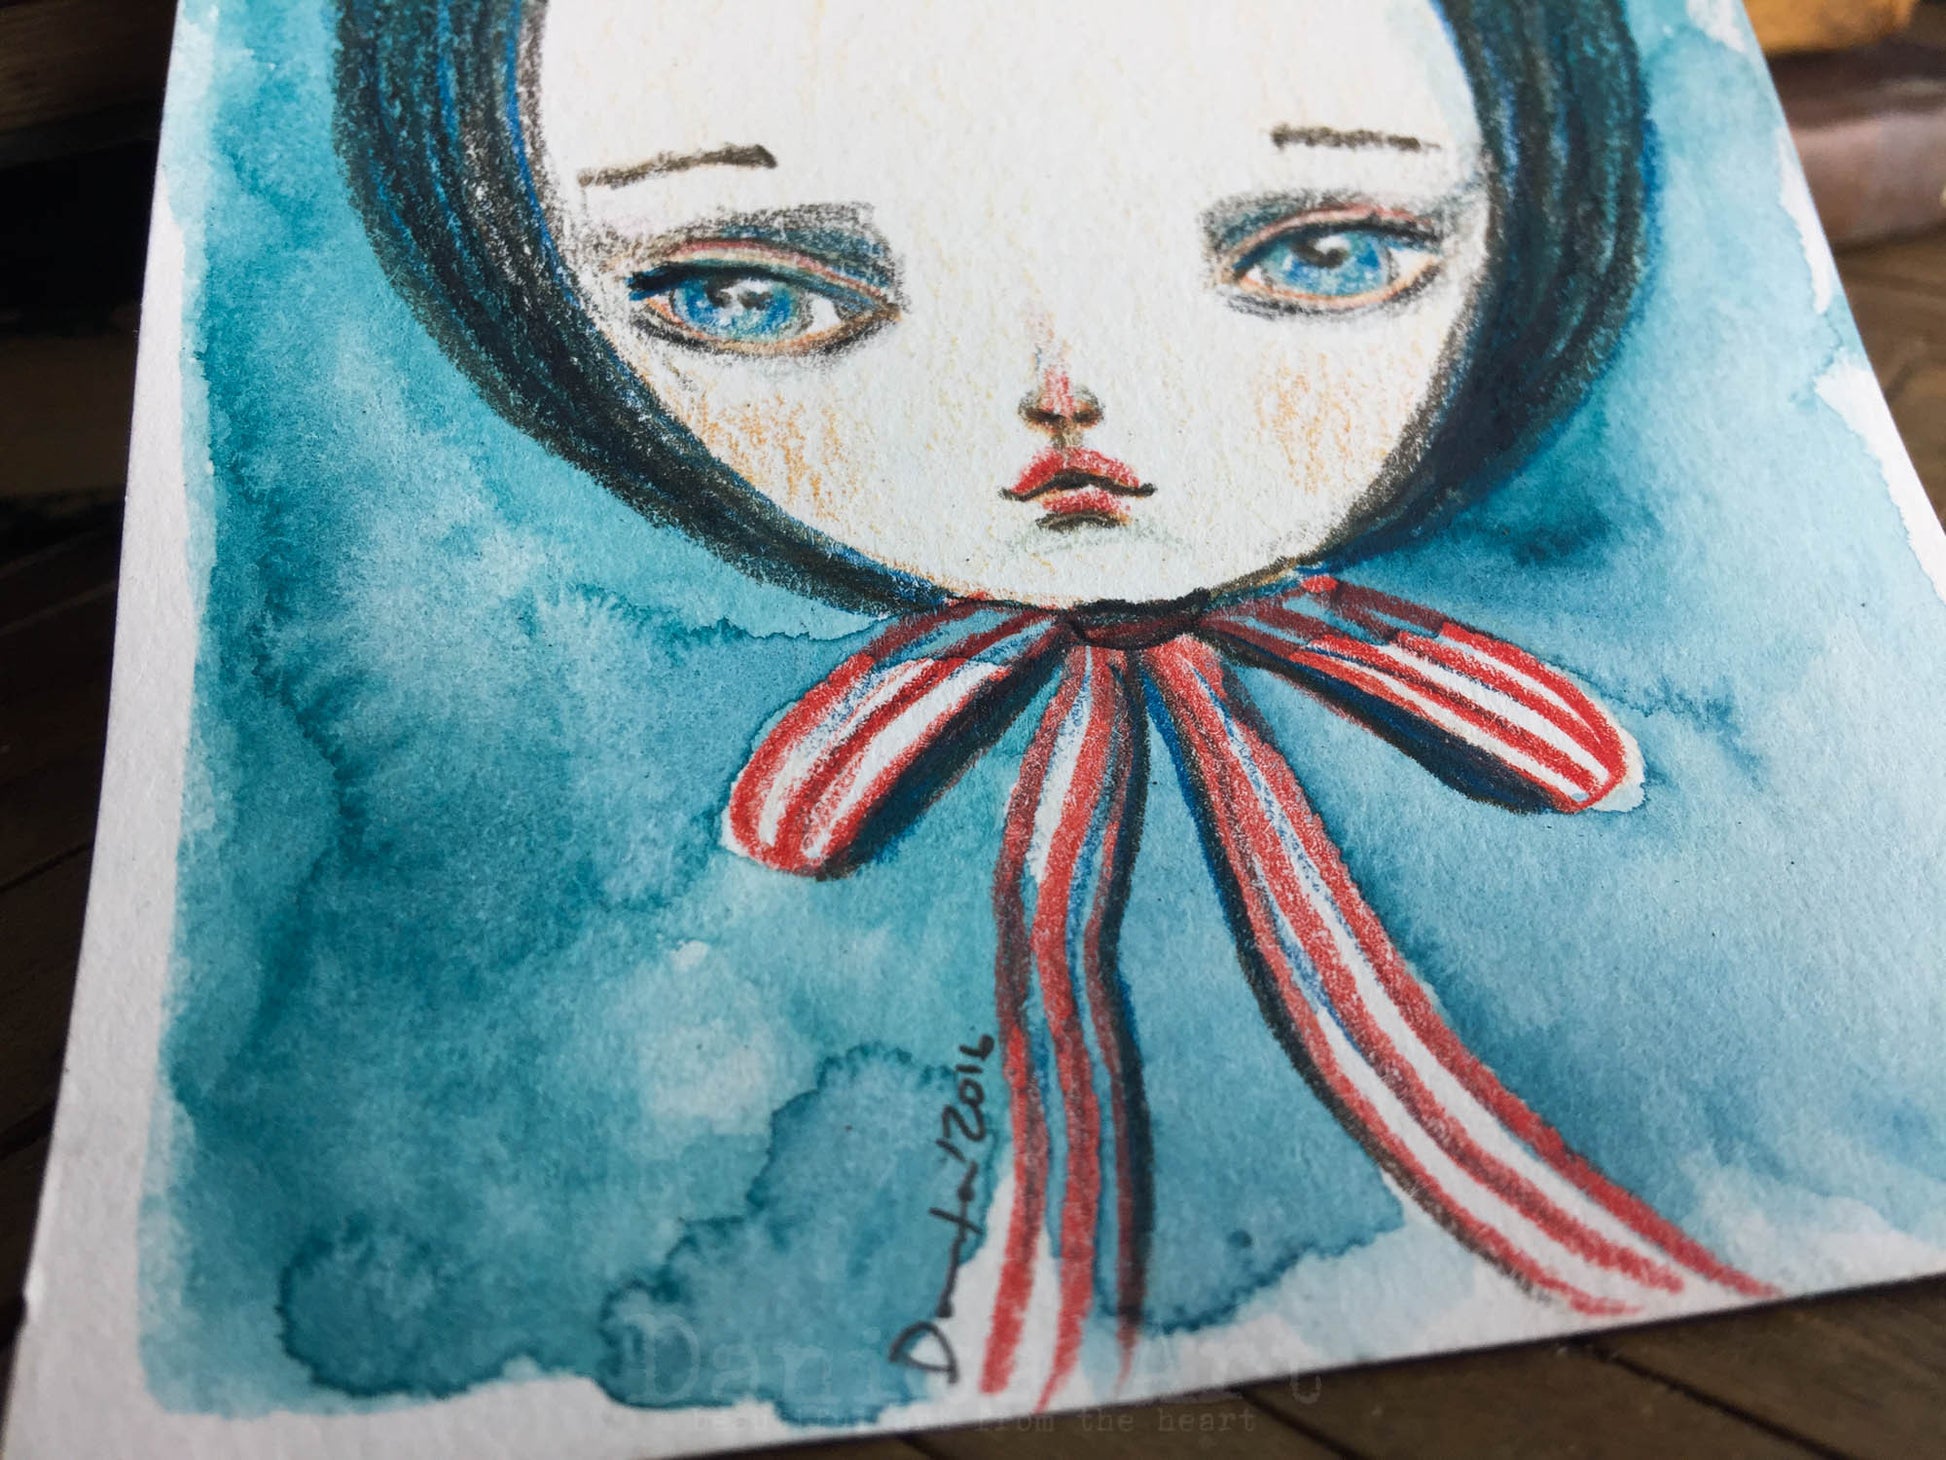 Study of a girl with a red bow, watercolor on paper original by Danita.